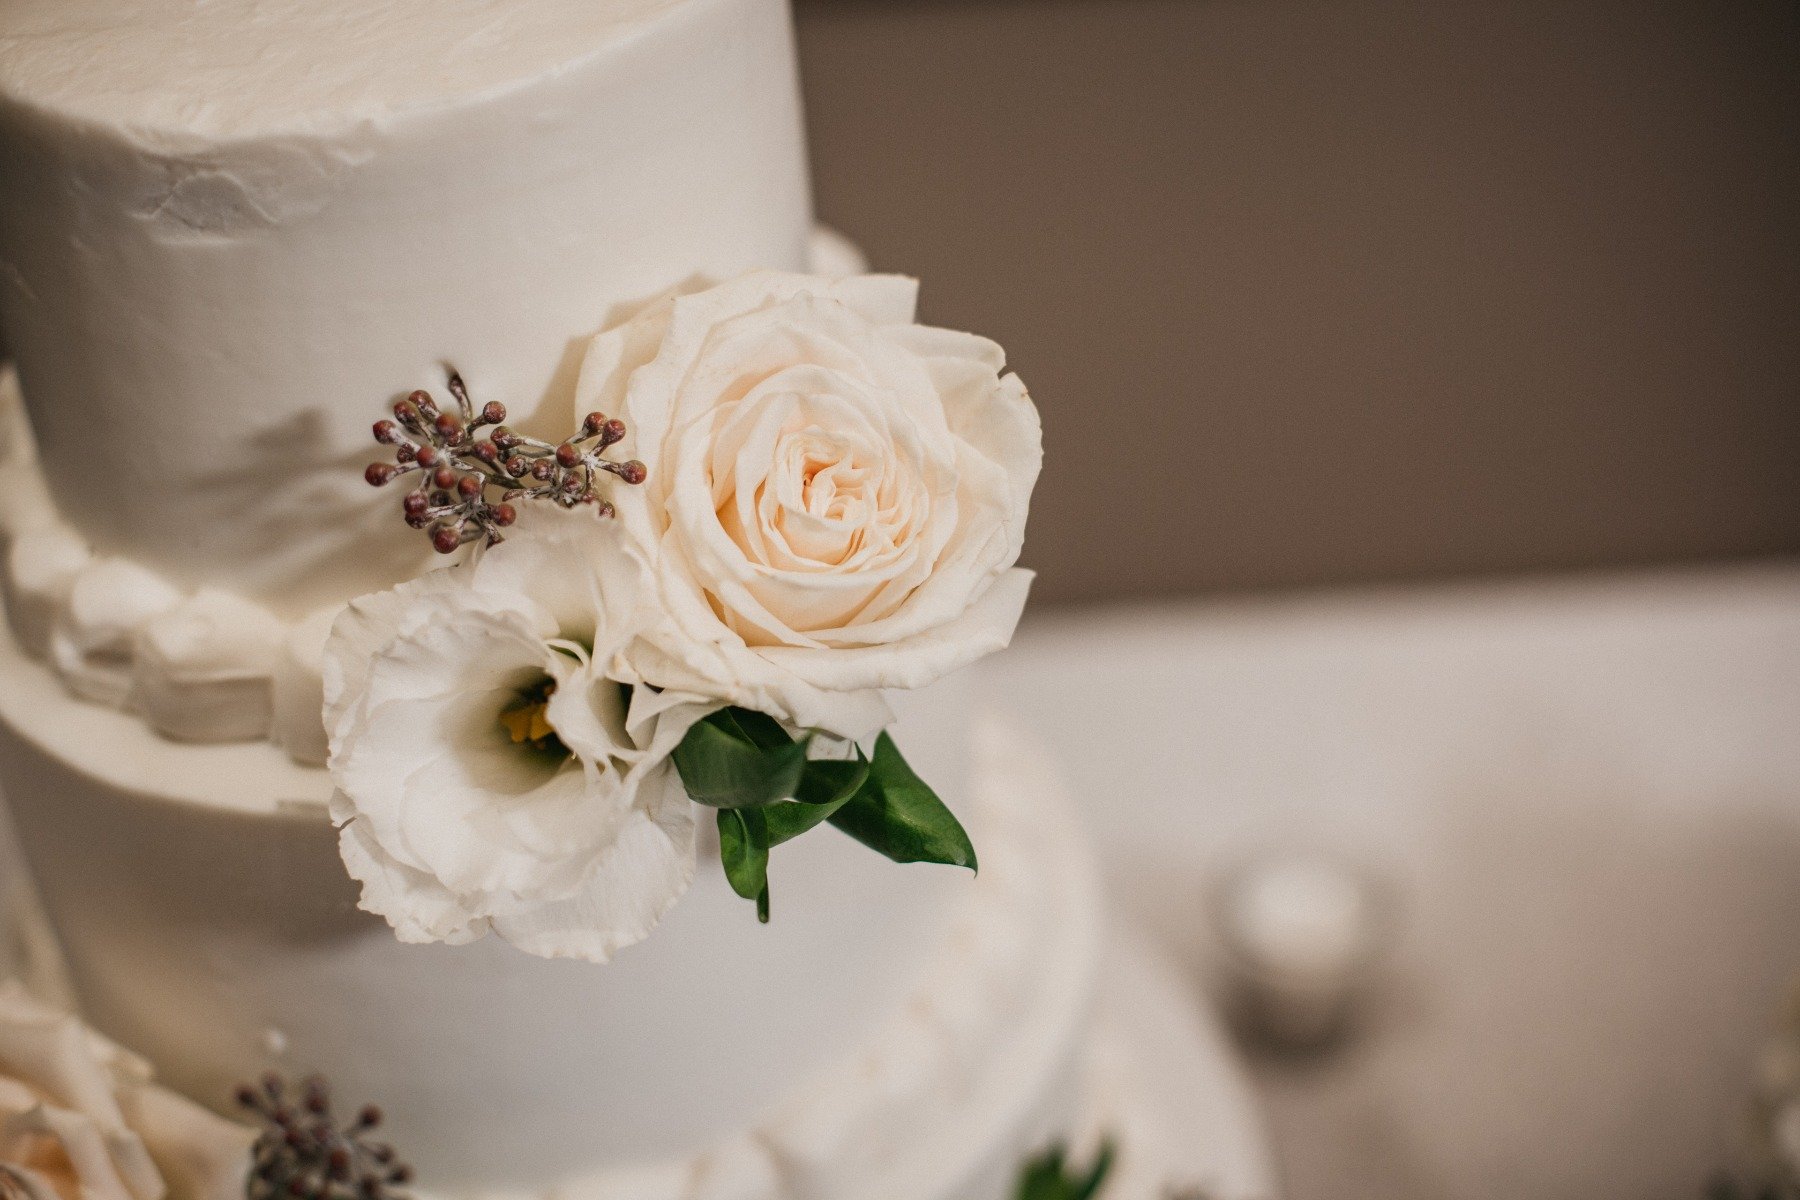 simple wedding cake with flowers